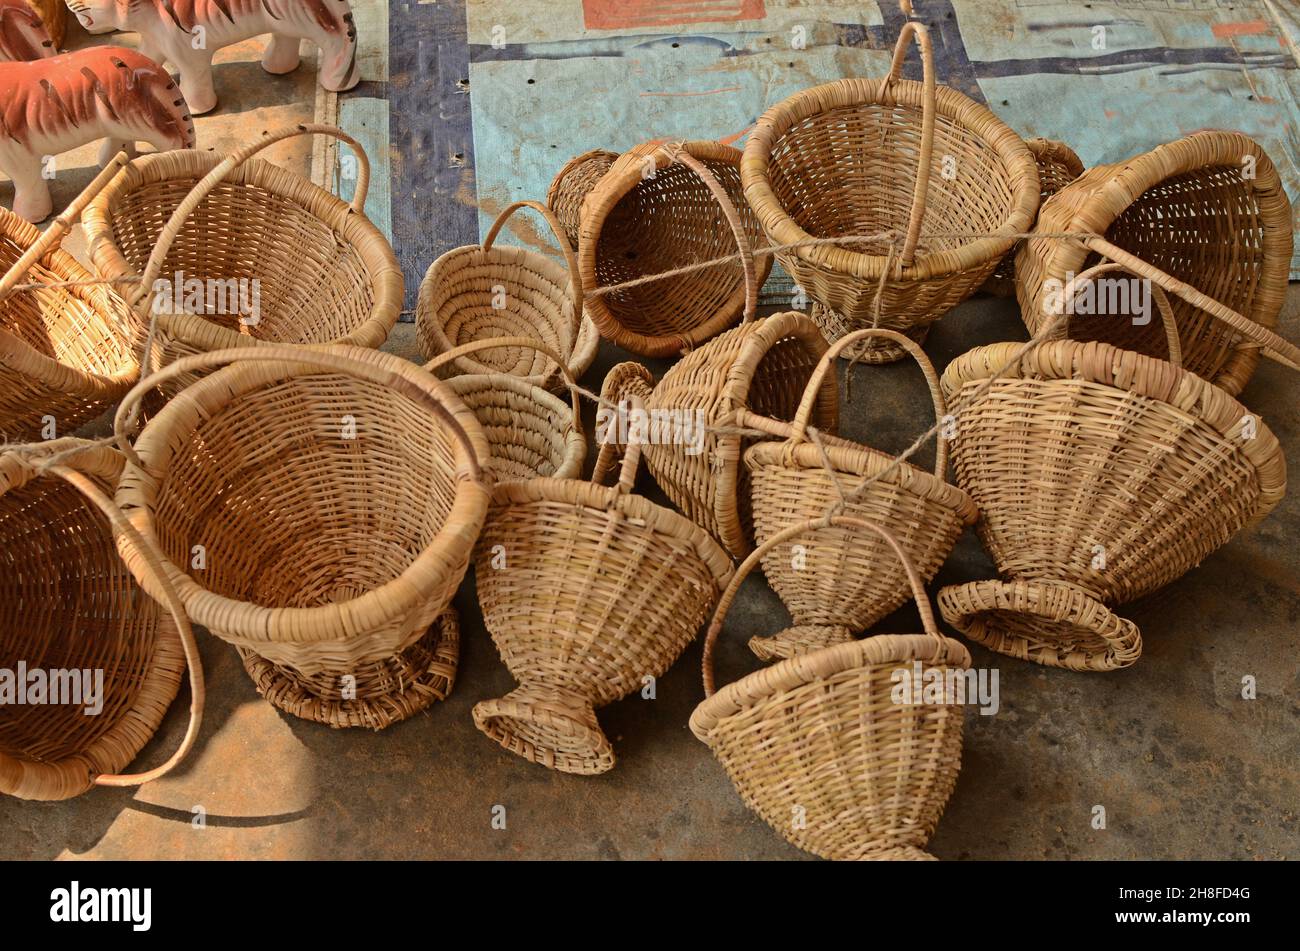 A variety of handicrafts made of bamboo such as baskets, flower baskets Stock Photo